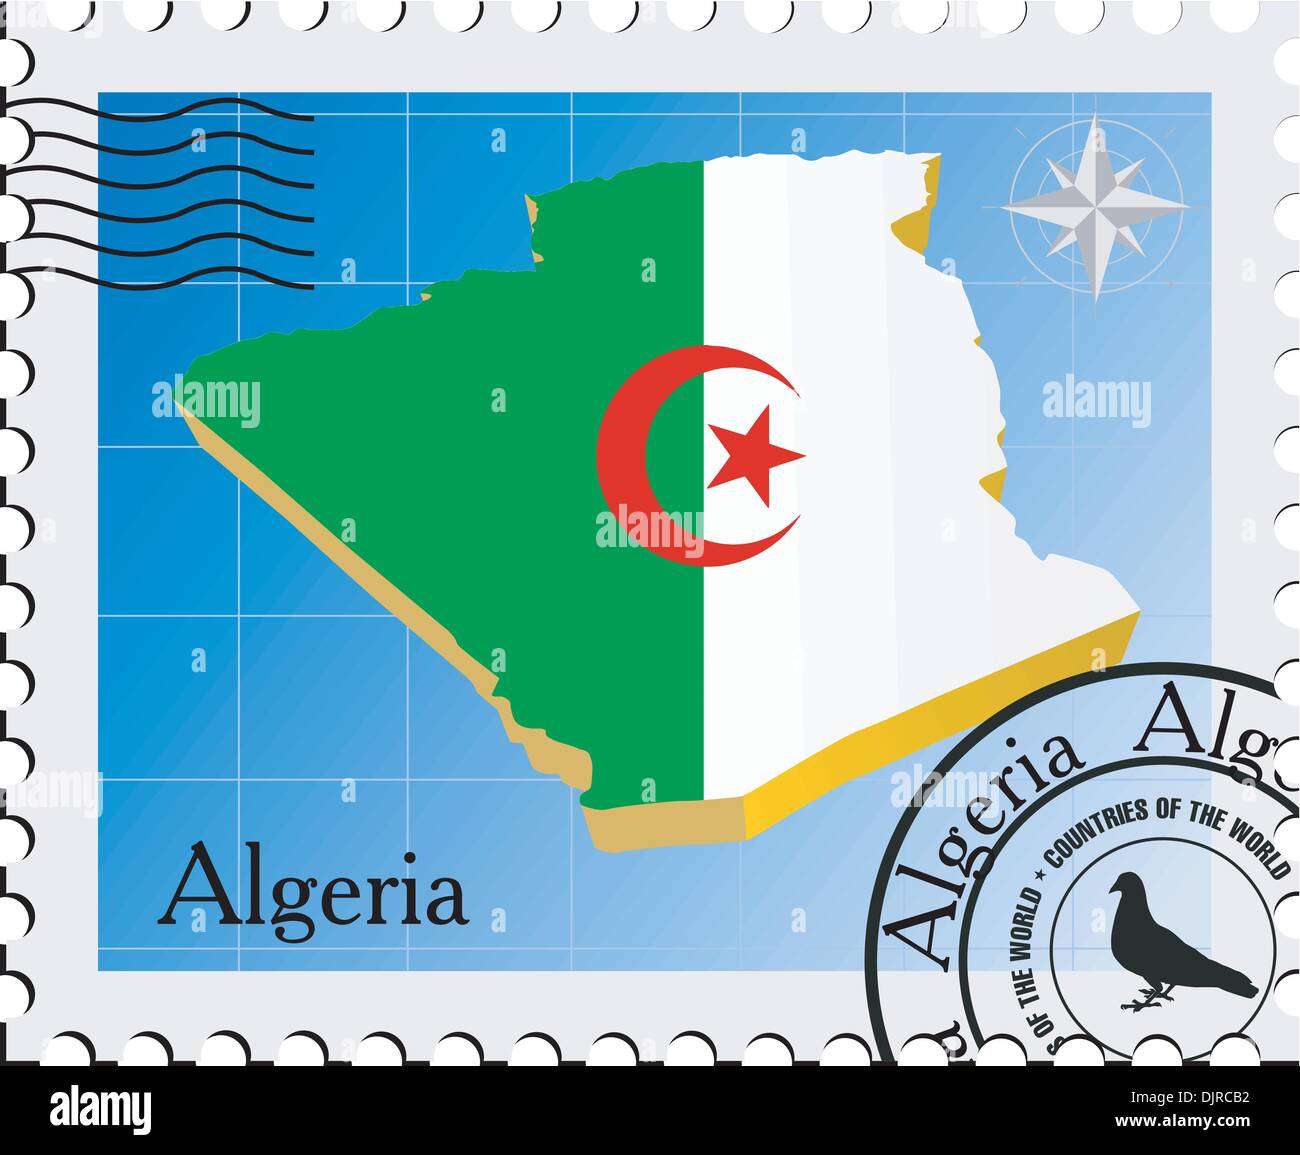 Vector stamp with the image maps of Algeria Stock Vector